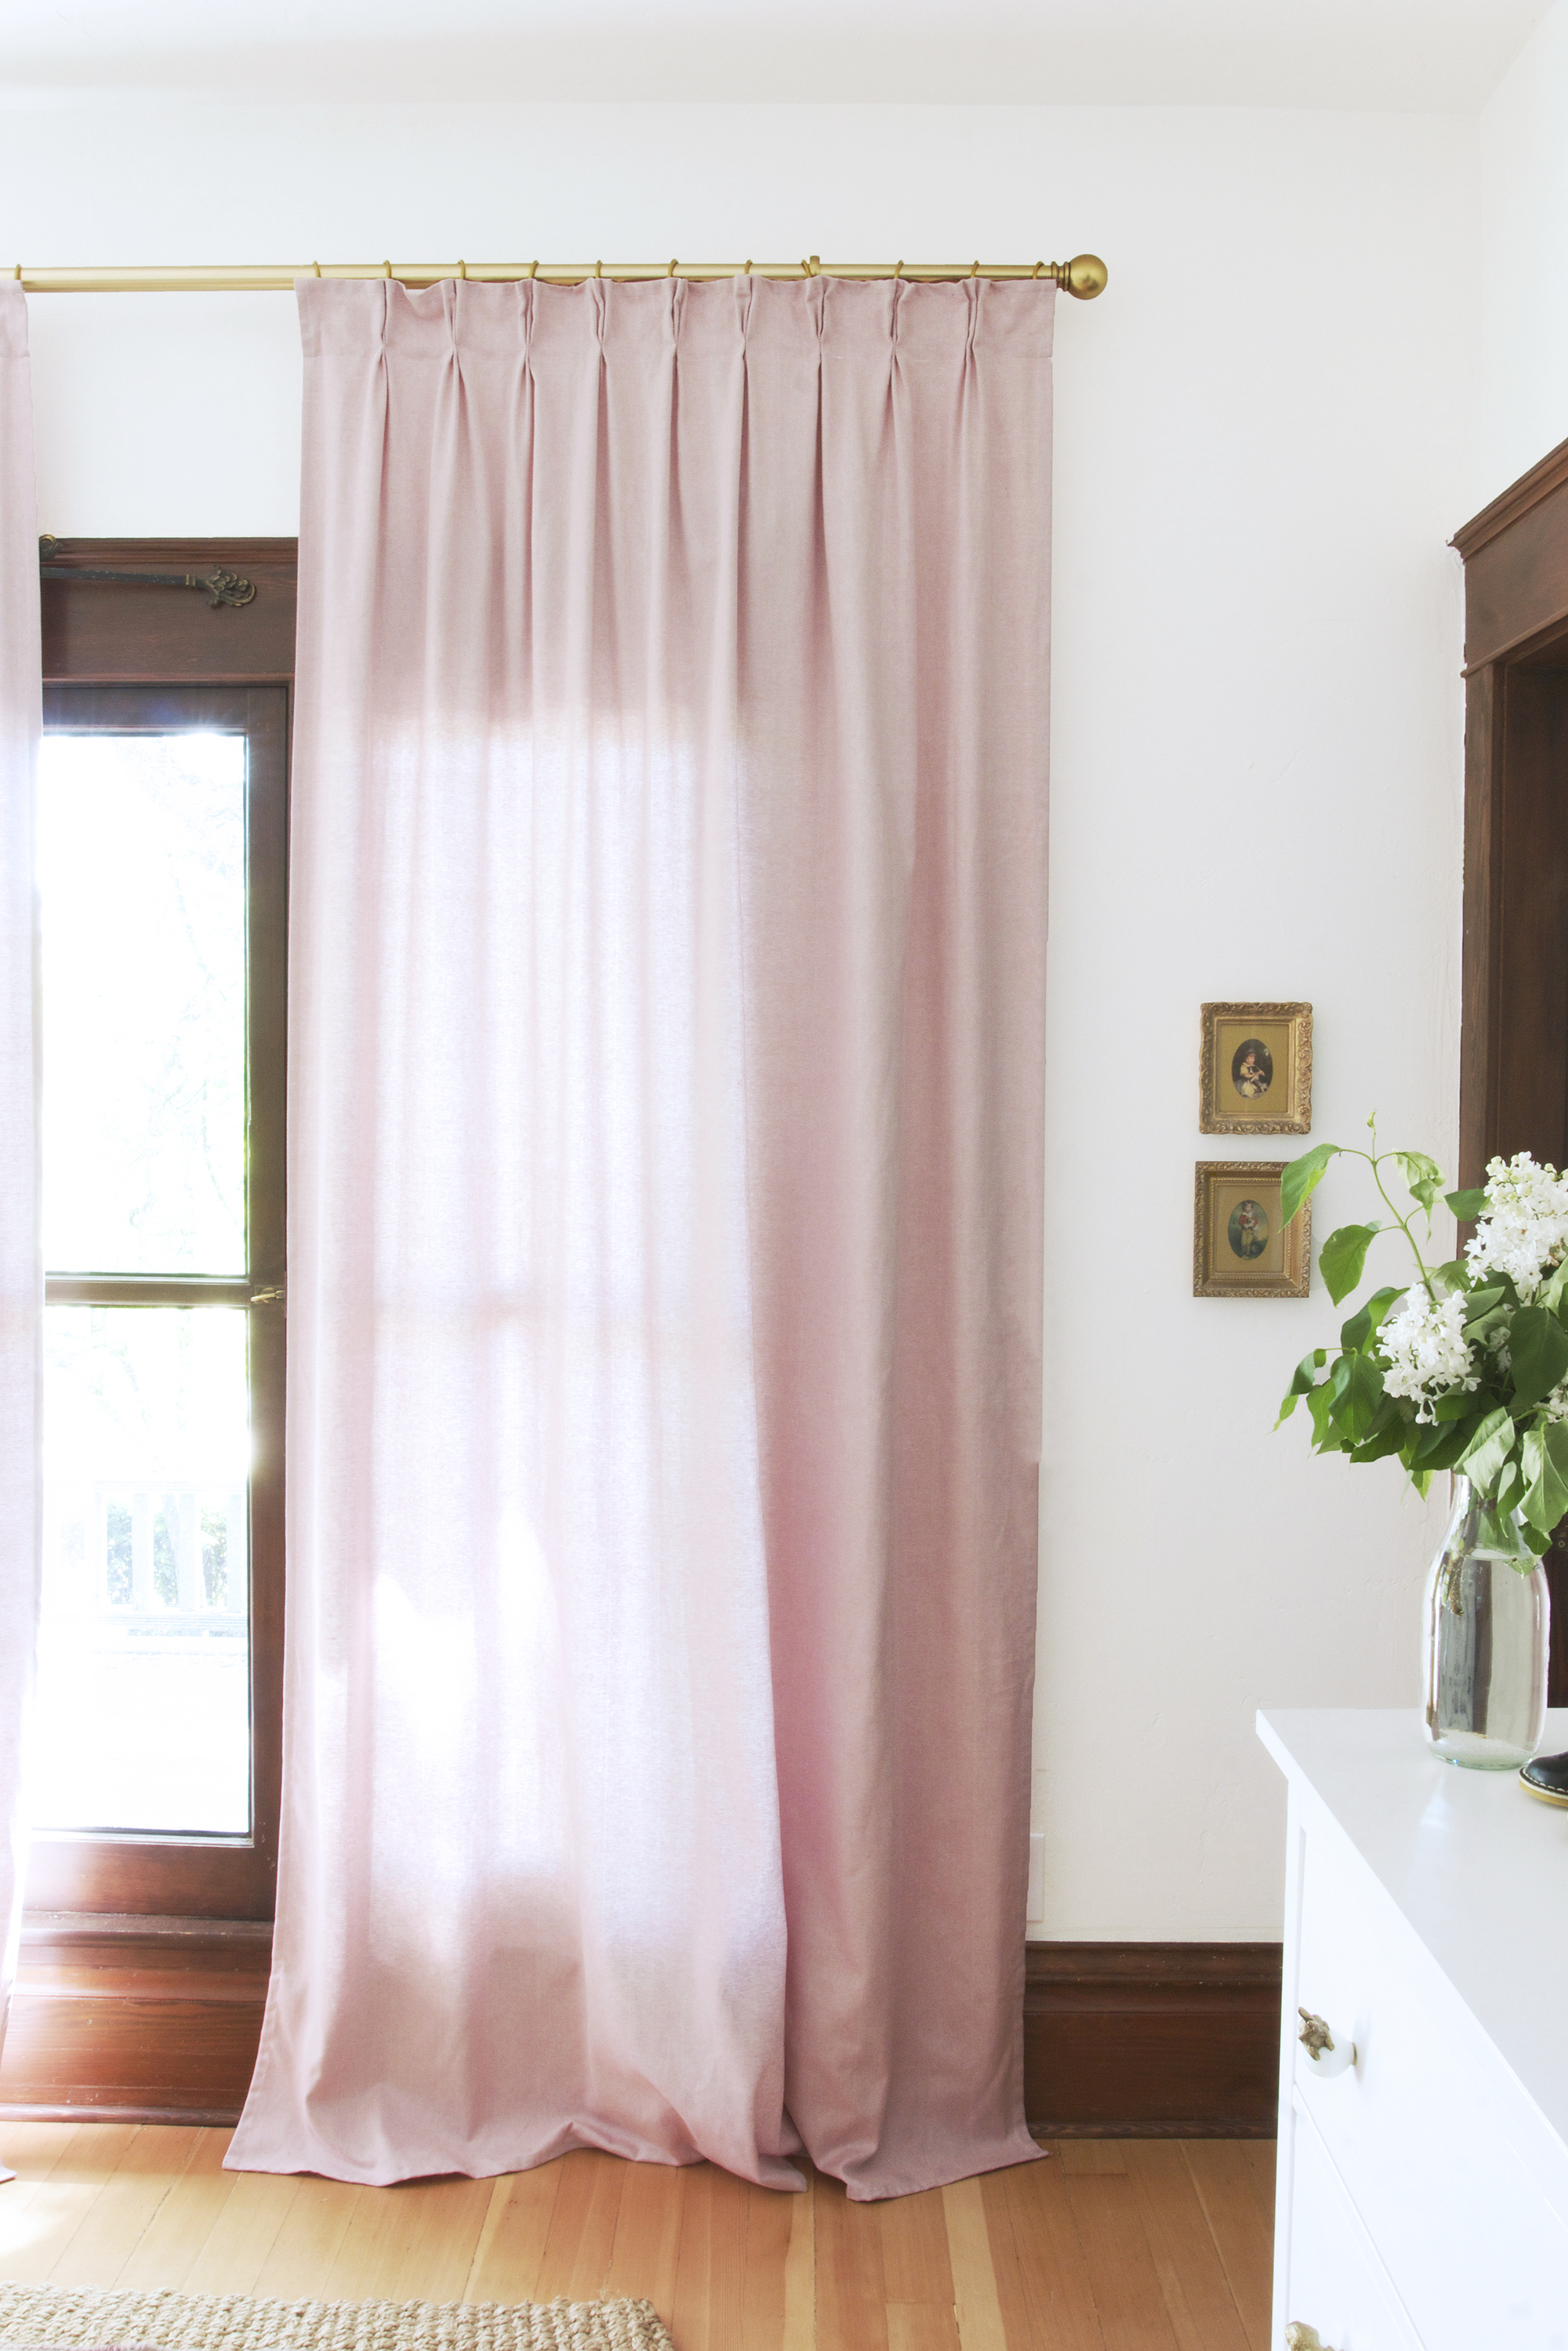 DIY Pinch Pleat Curtains // How to Make Budget IKEA Curtains Look Like a  Million Bucks — The Grit and Polish